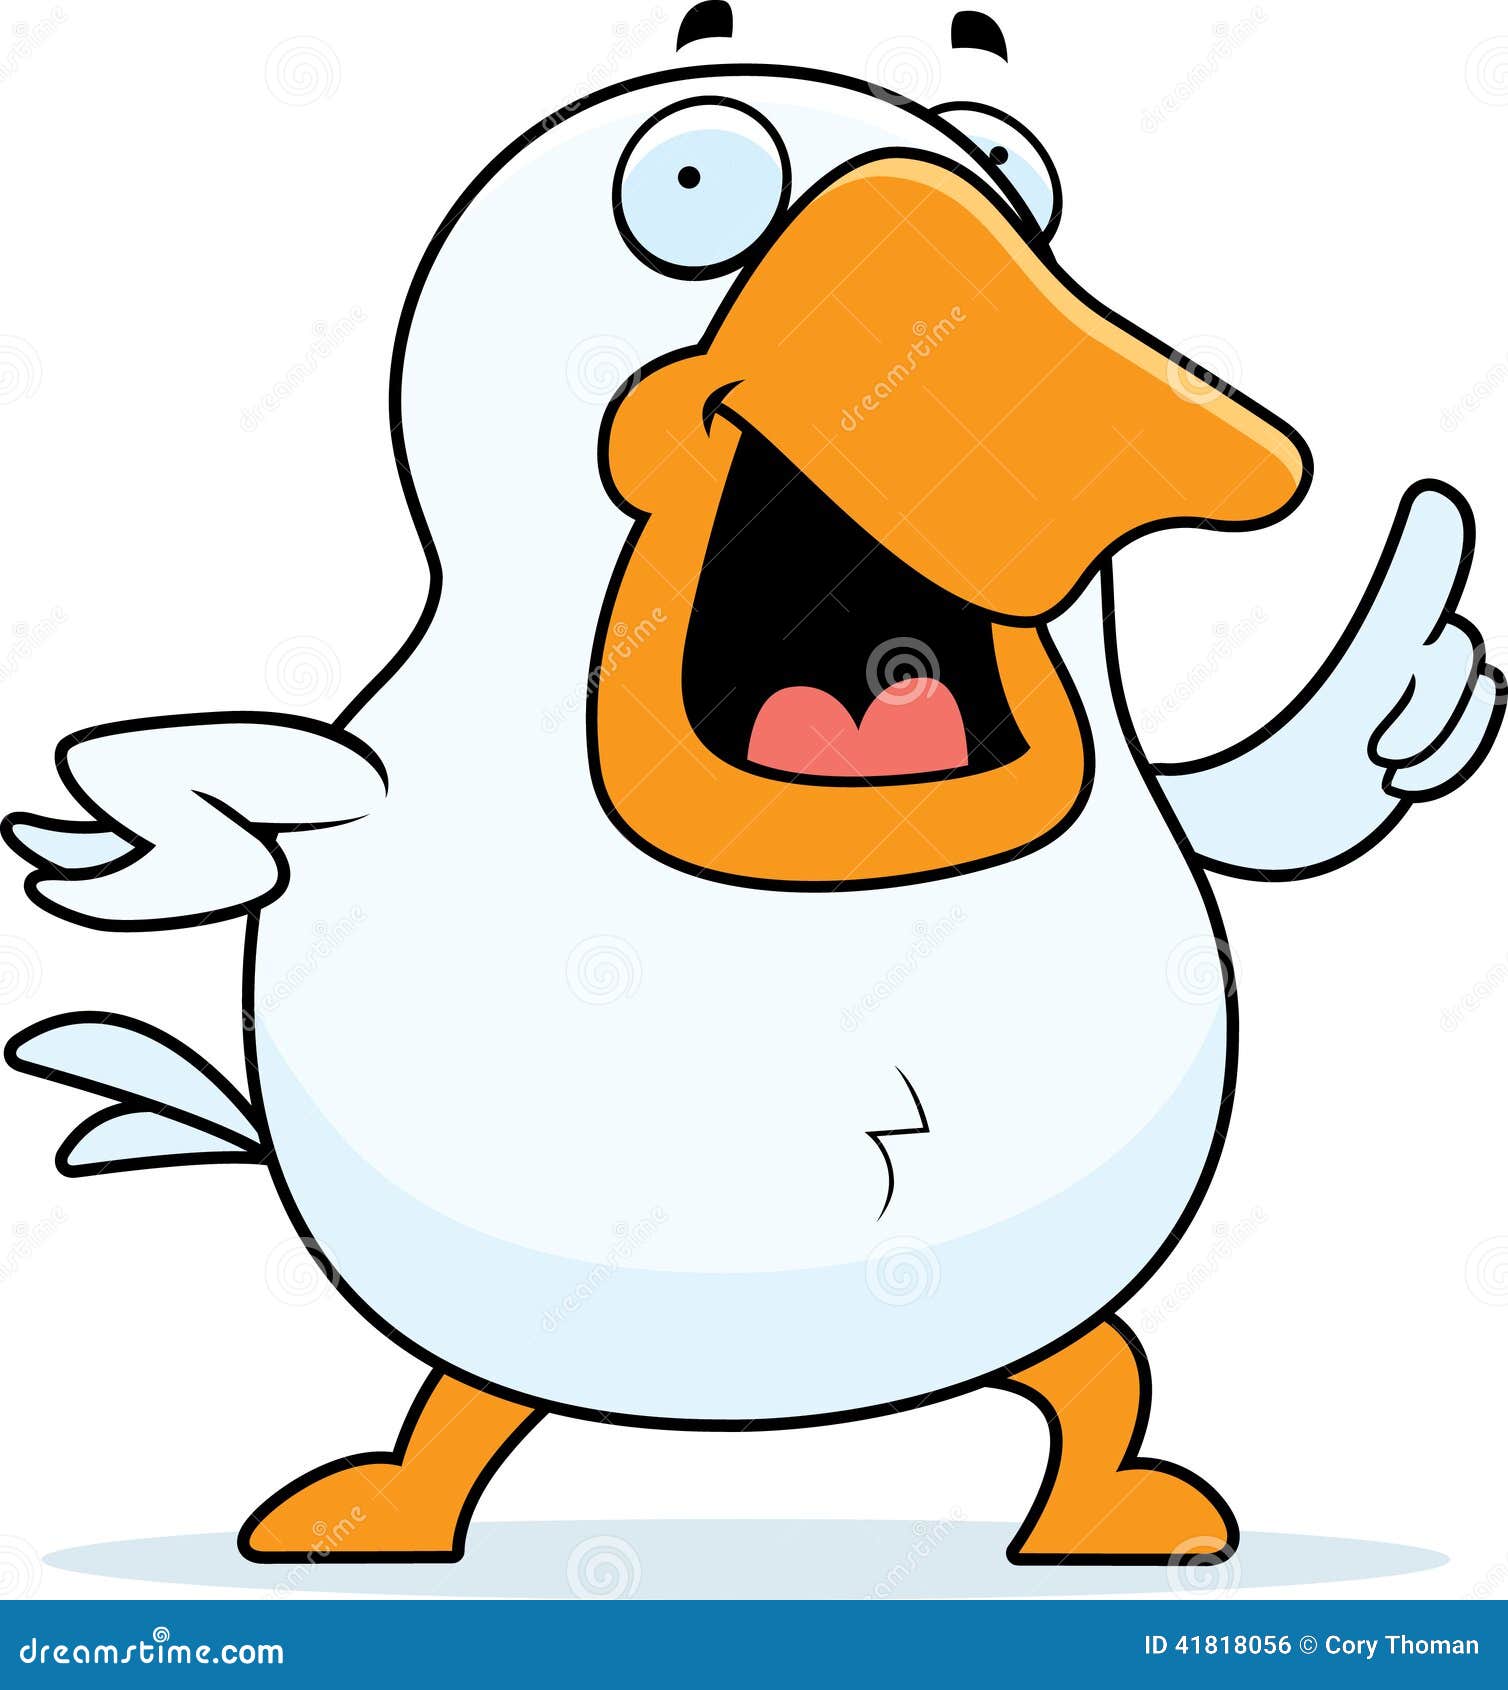 silly goose clipart - photo #18